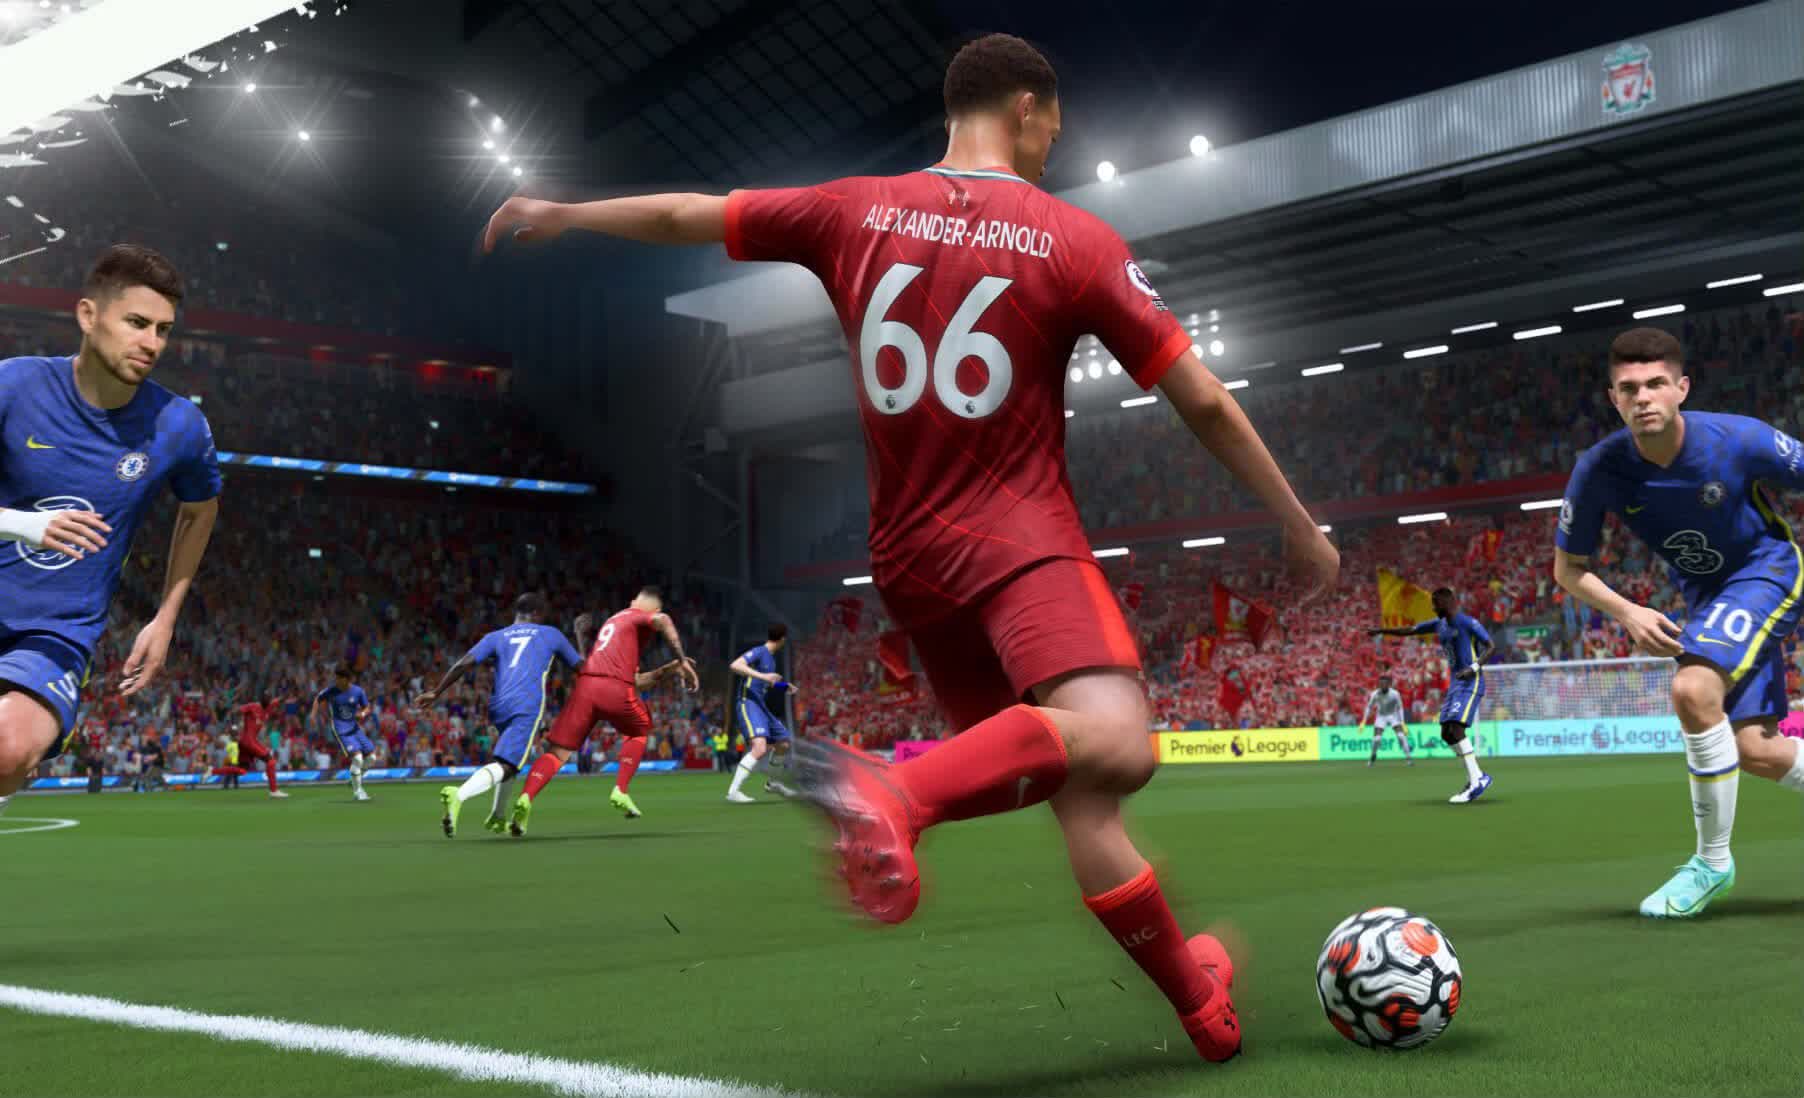 EA promises to honor pricing mistake after $60 game sells for $0.06